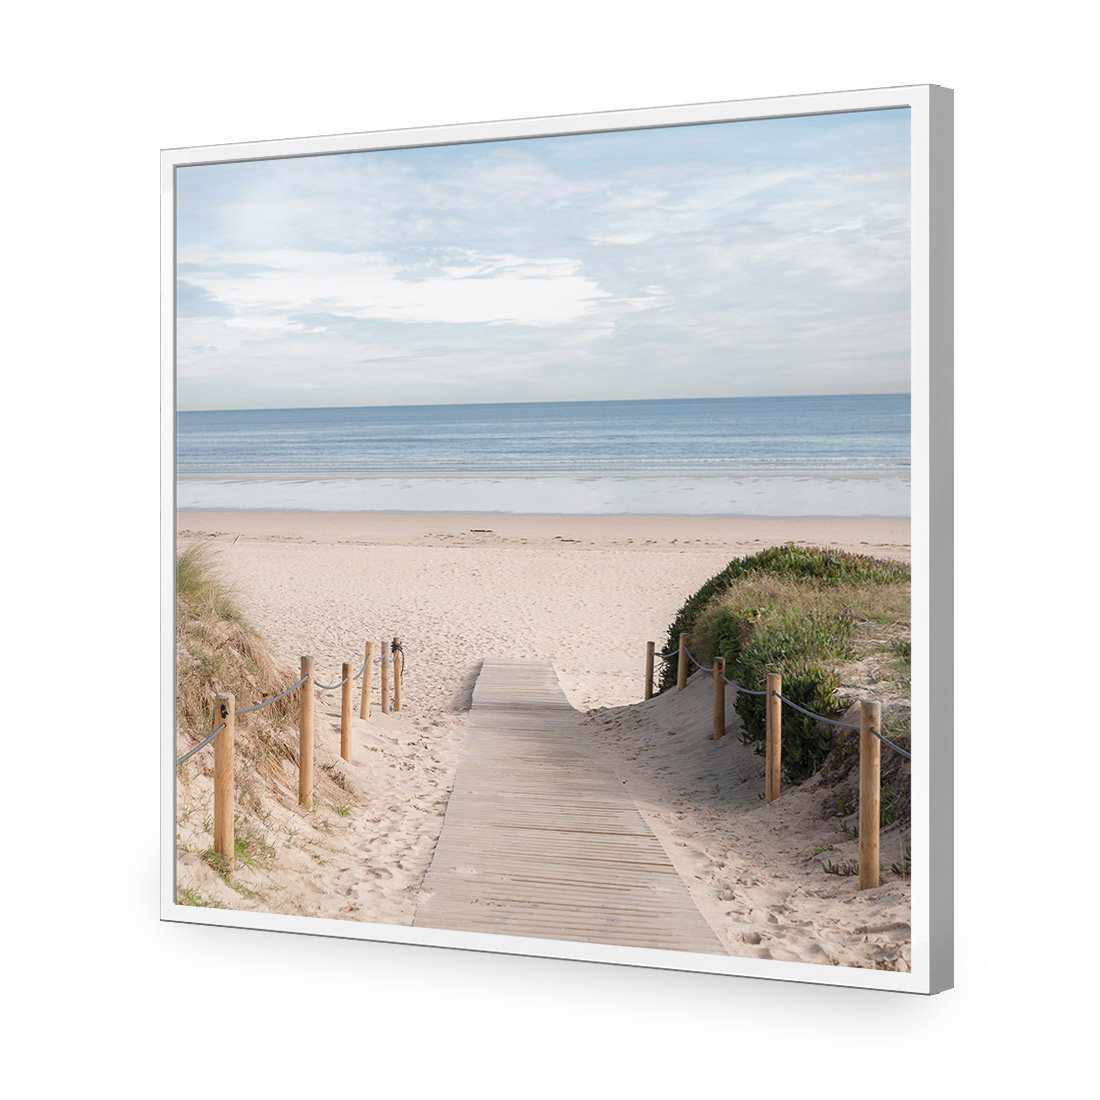 Pathway To The Sea, Square-Acrylic-Wall Art Design-Without Border-Acrylic - White Frame-37x37cm-Wall Art Designs